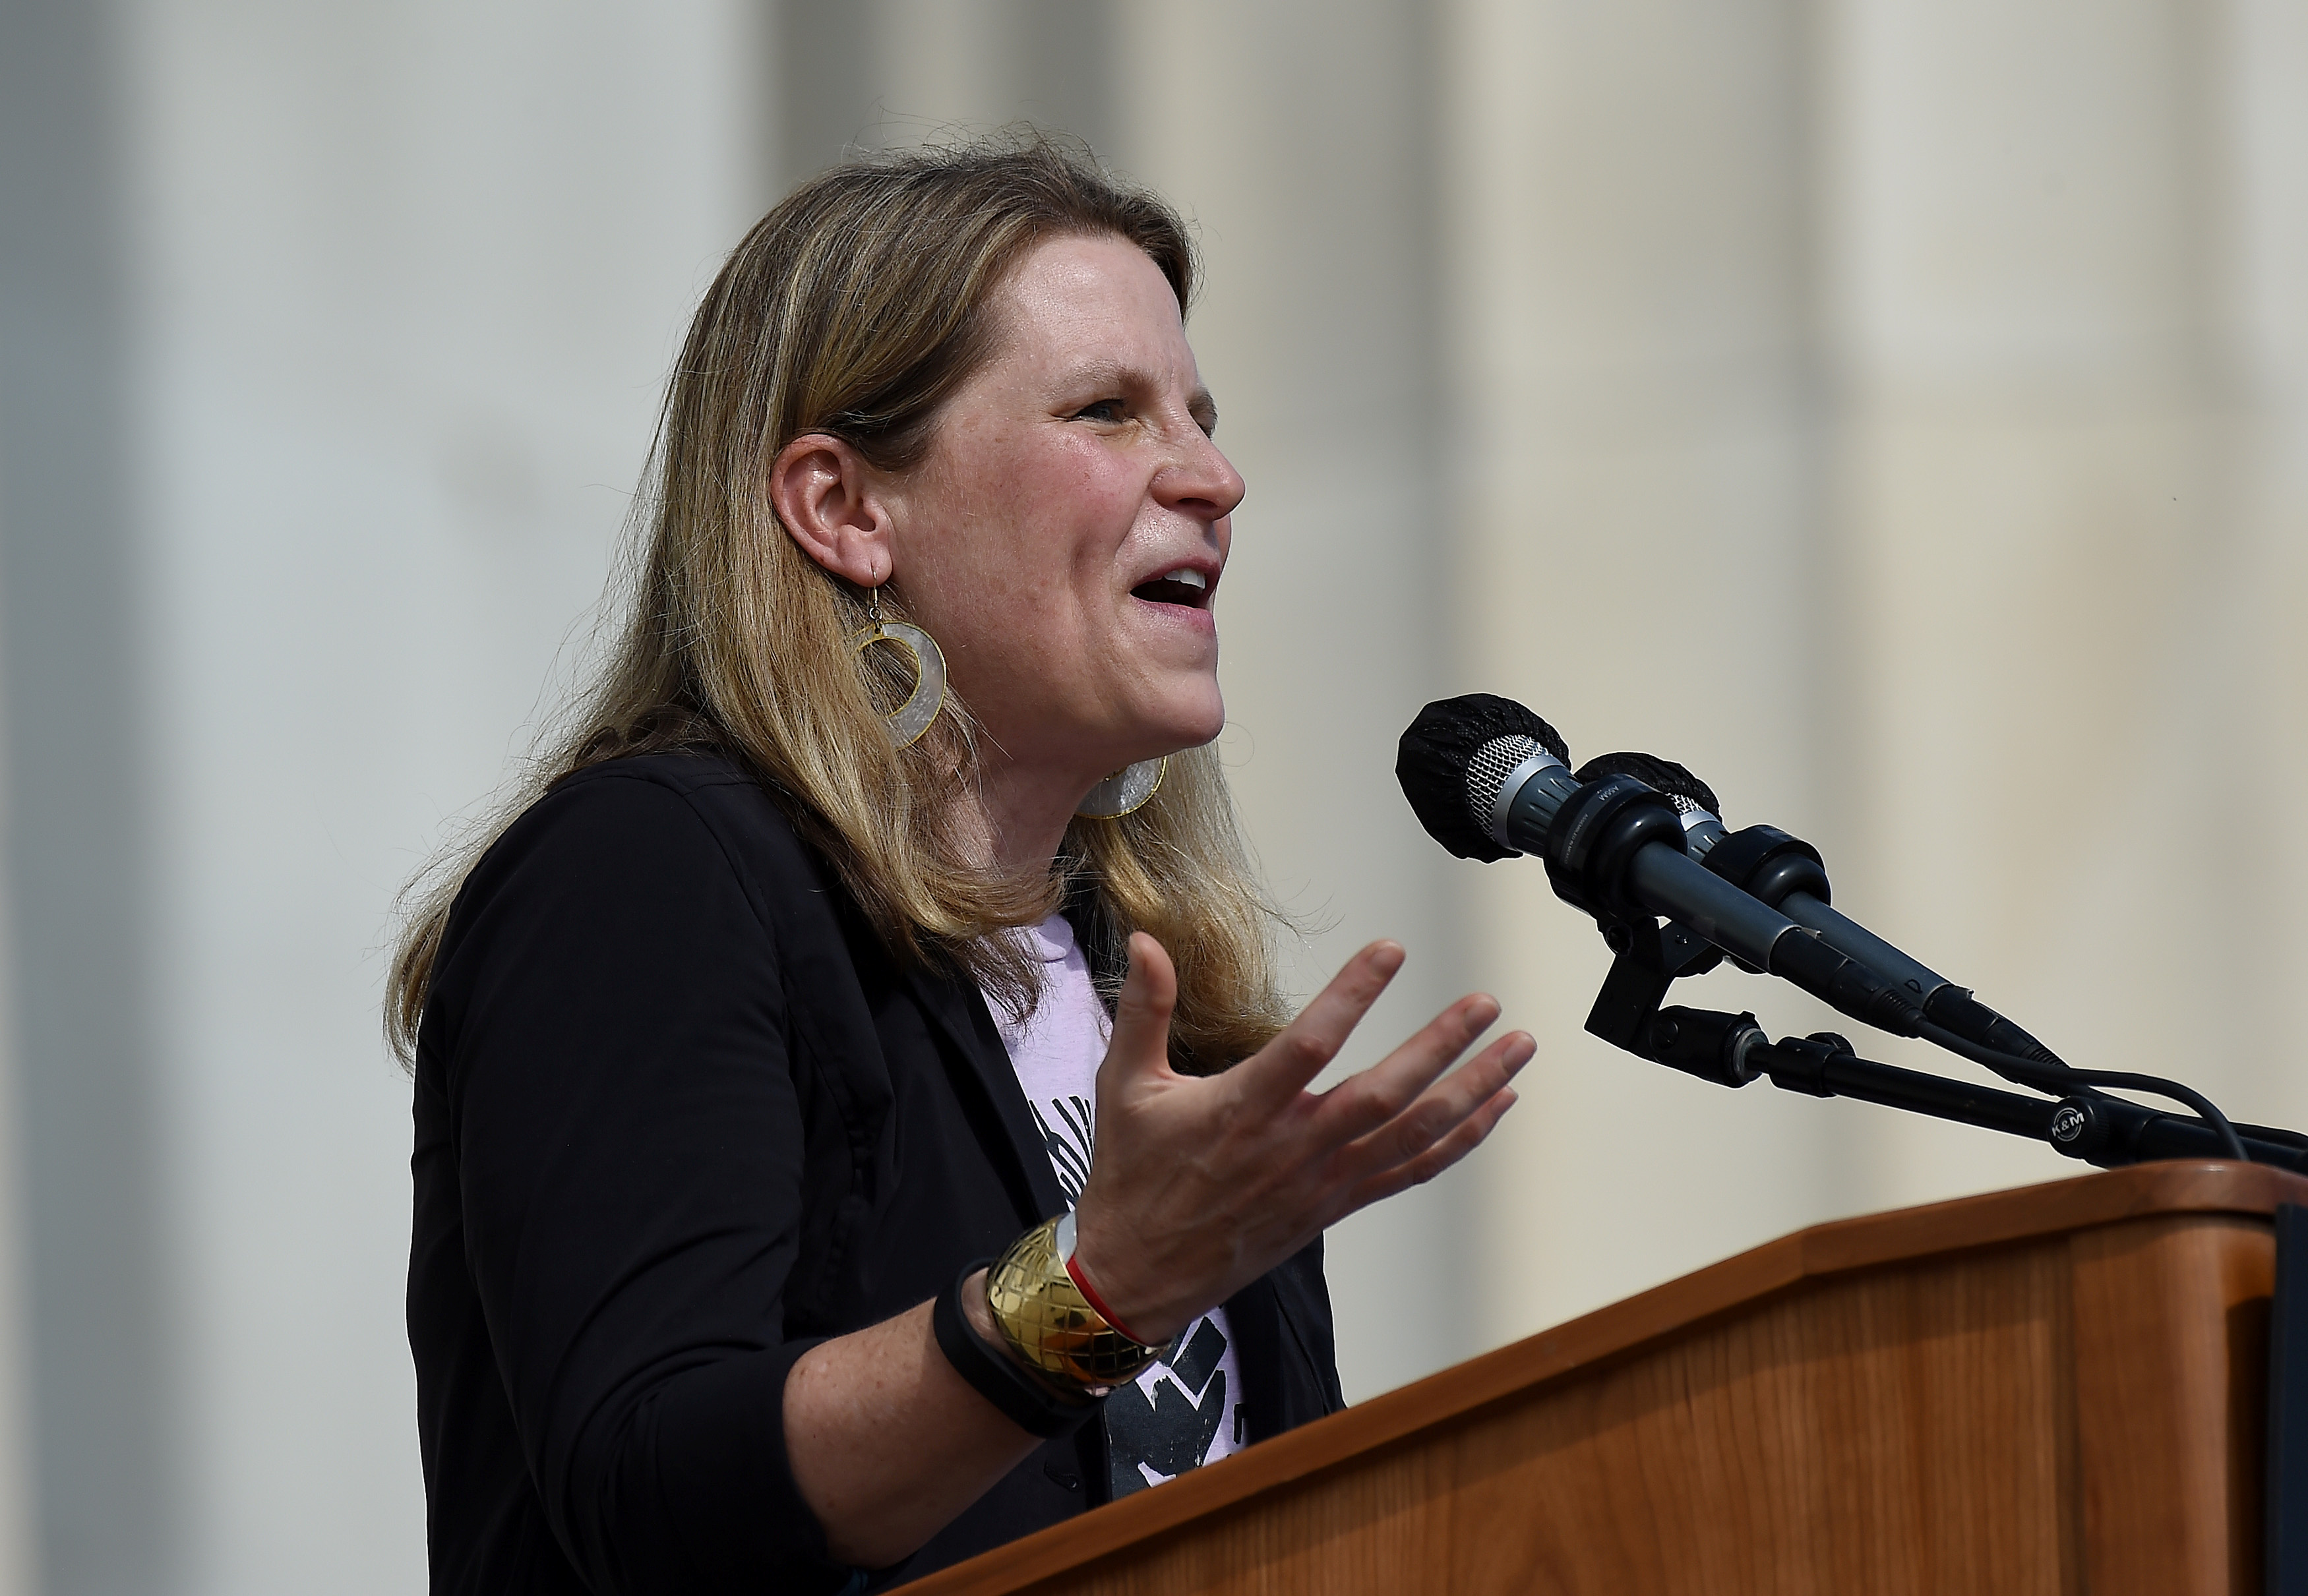 Secretary-Treasurer of American Federation of Labor and Congress of Industrial Organizations (AFL-CIO) Liz Shuler speaks at the Lincoln Memorial during the 'Get Your Knee Off Our Necks' march in support of racial justice, in Washington, U.S., August 28, 2020. Olivier Douliery/Pool via REUTERS/Files